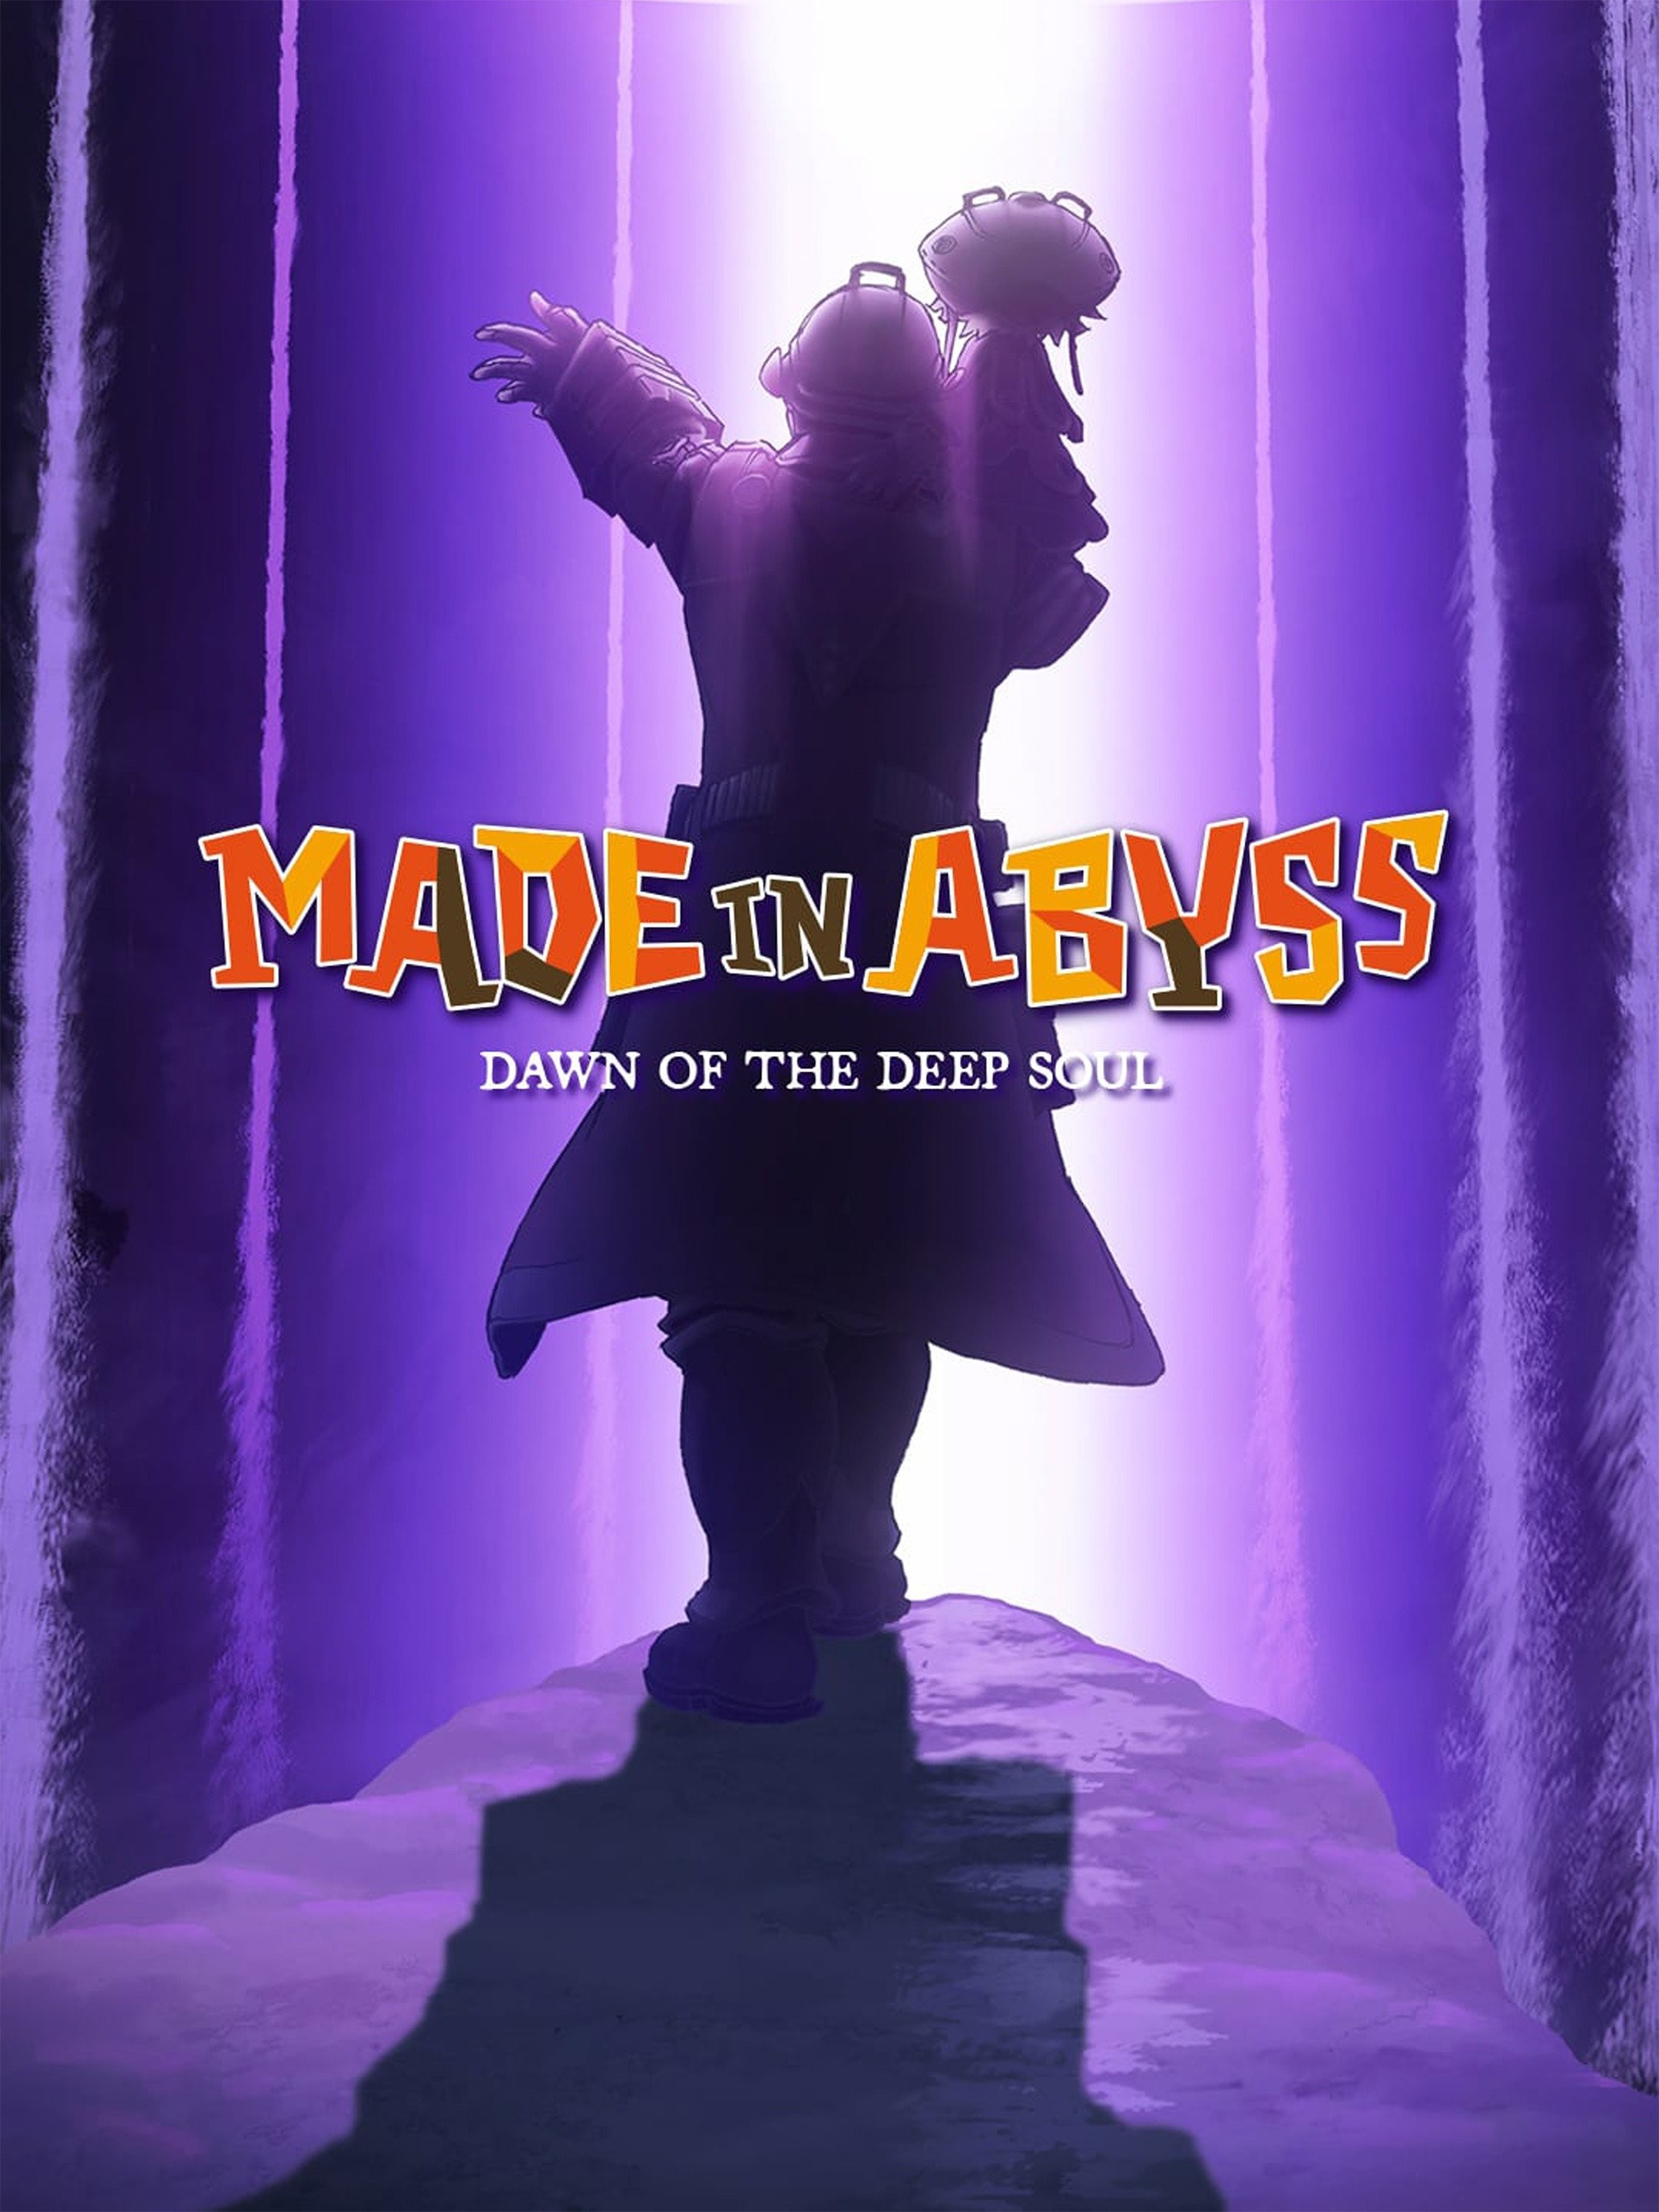 A review of Made in Abyss: Dawn of the Deep Soul